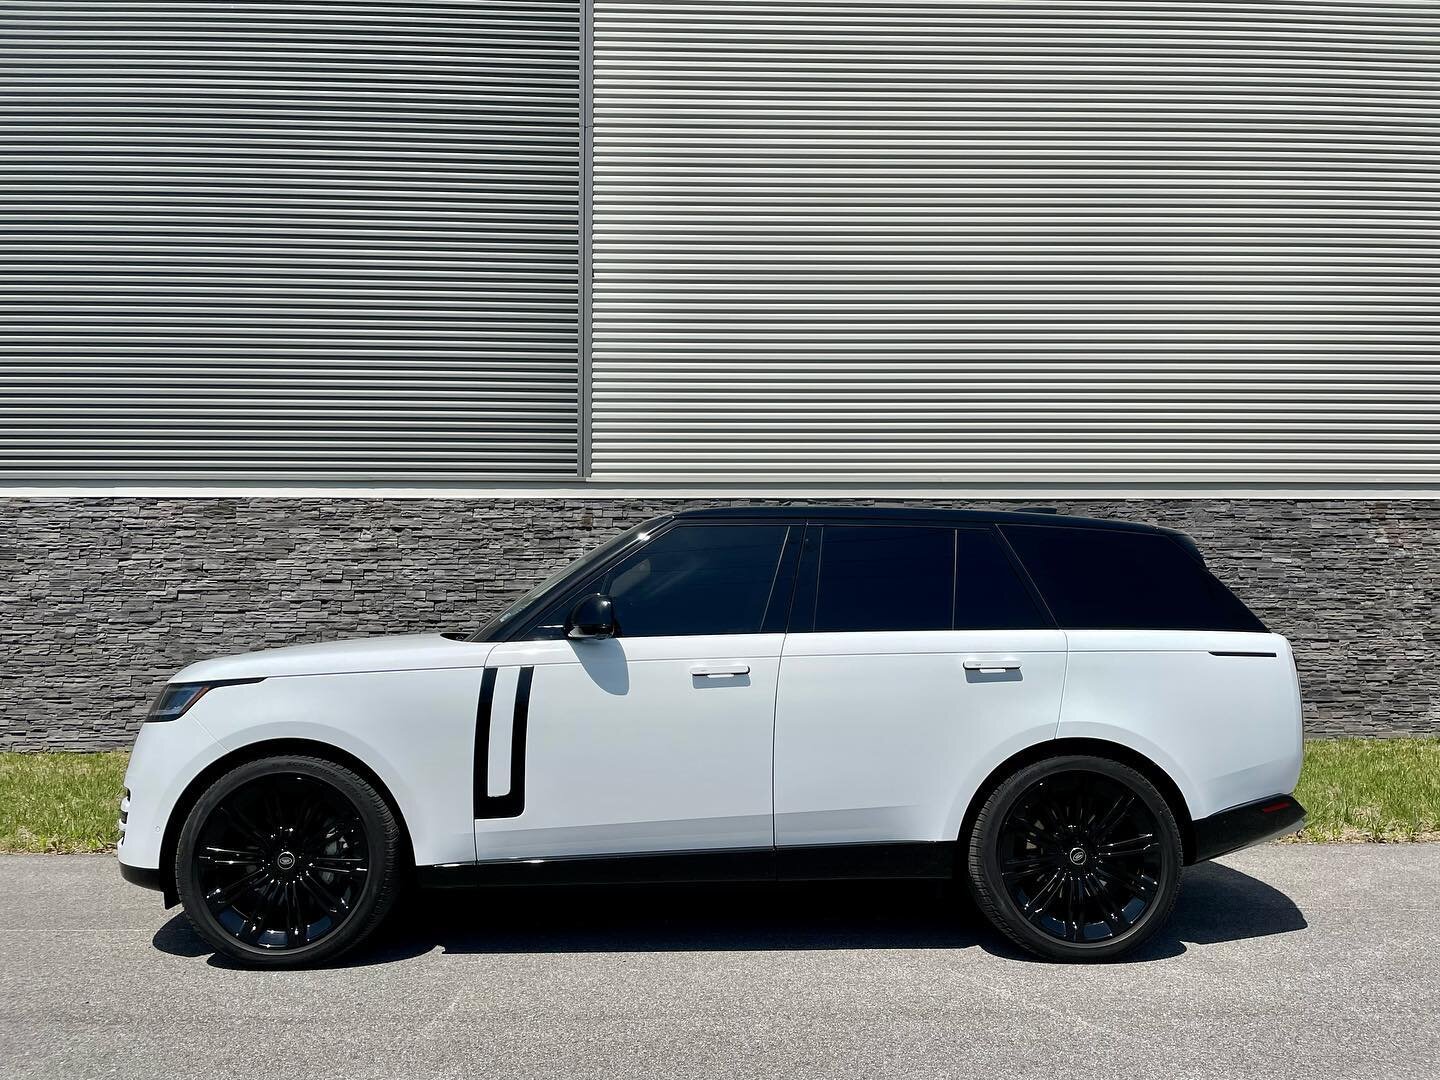 Brand new 2023 Range Rover wrapped in @3m Gloss White is now the ultimate Stormtrooper! Finished off with a 2-year ceramic coating for that added protection #radwraps